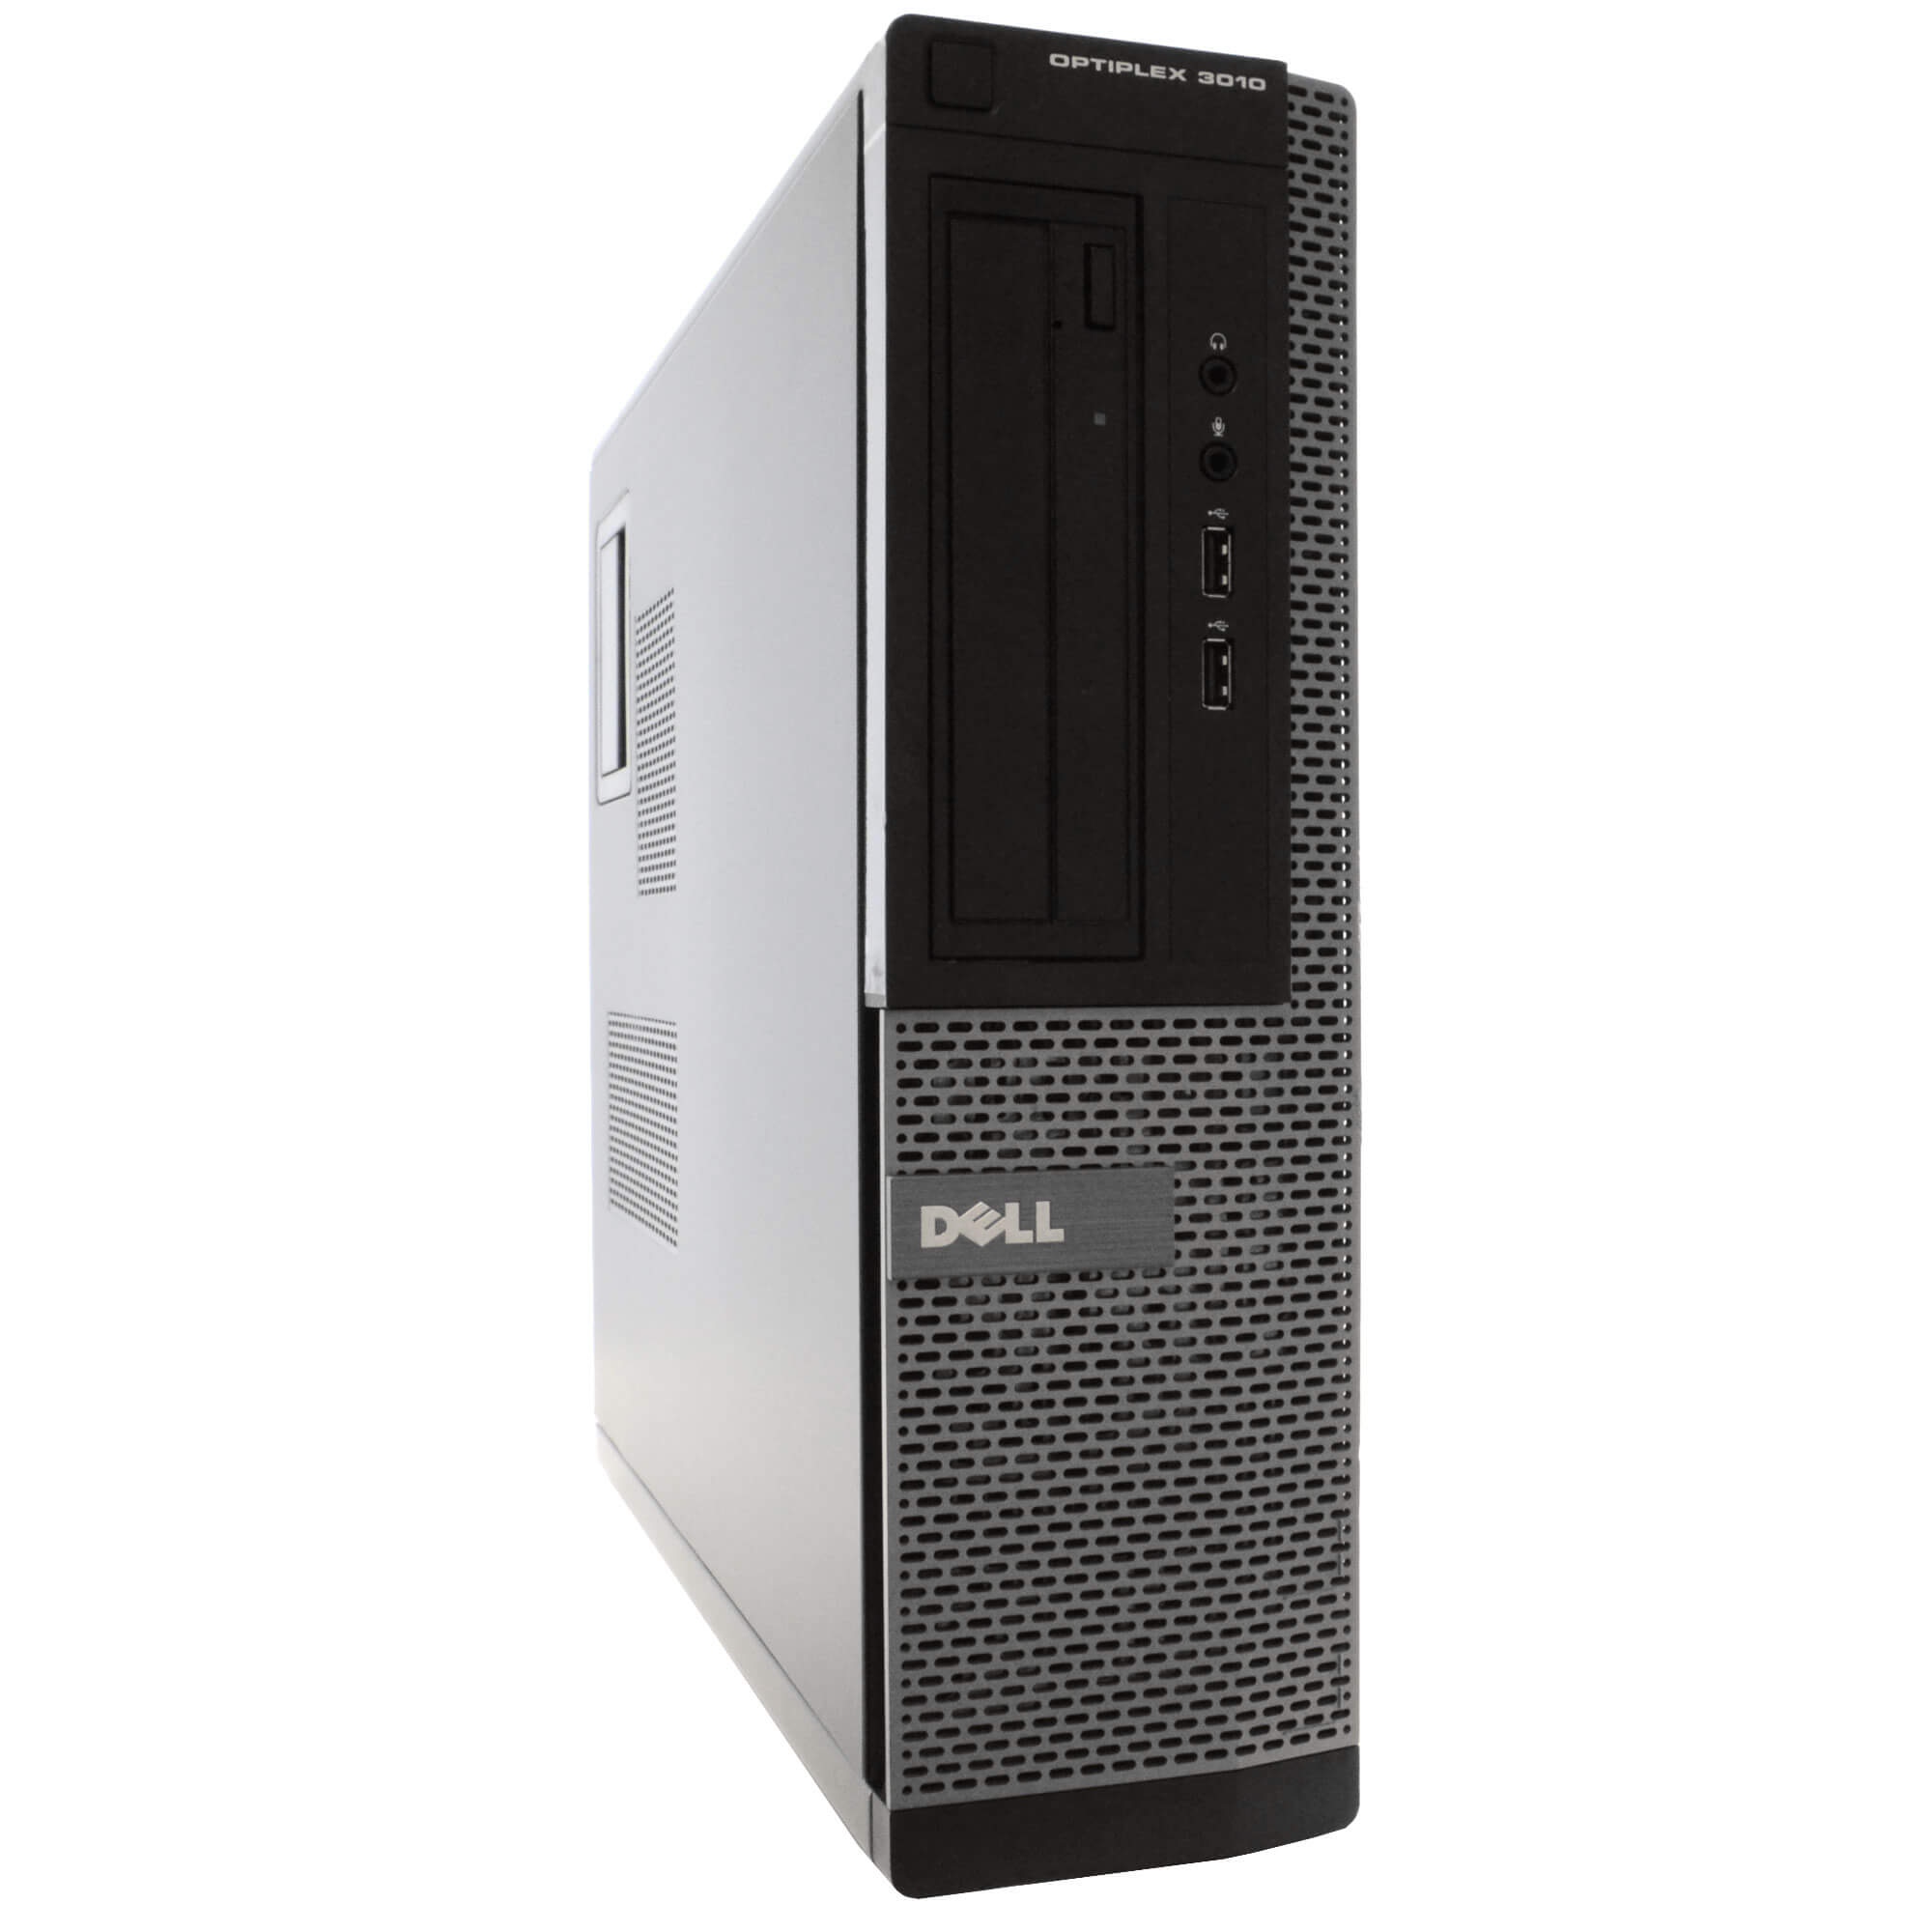 DELL Optiplex 3010 Desktop Computer PC, Intel Quad-Core i5, 120GB SSD, 8GB DDR3 RAM, Windows 10 Home, DVD, WIFI, USB Keyboard and Mouse (Used - Like New) - image 2 of 7